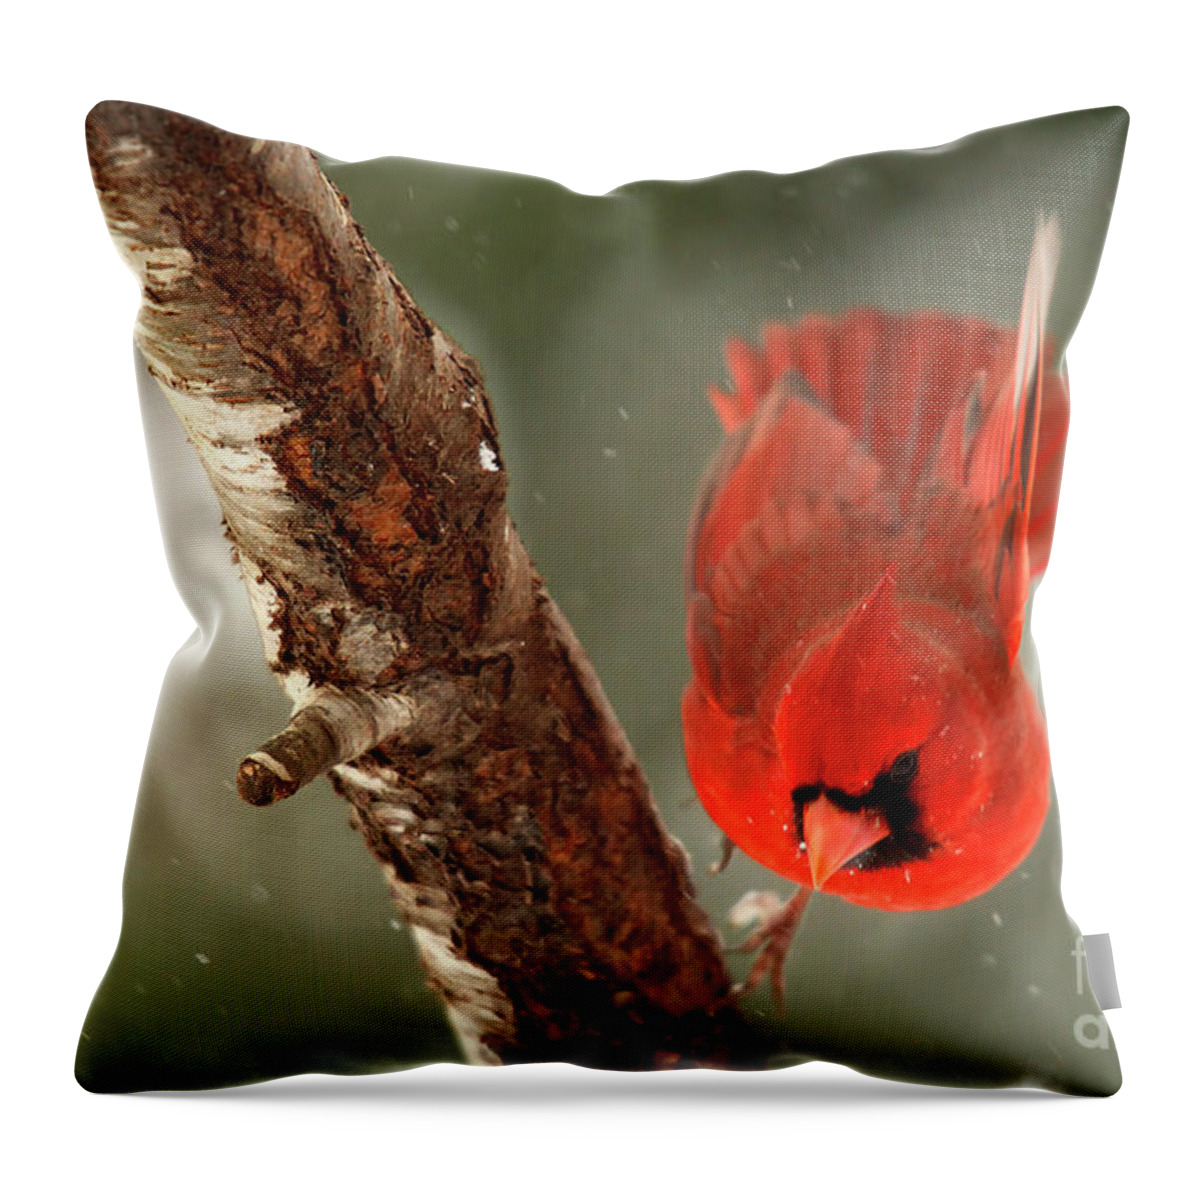 Take Off Throw Pillow featuring the photograph Male Cardinal Take Off by Darren Fisher